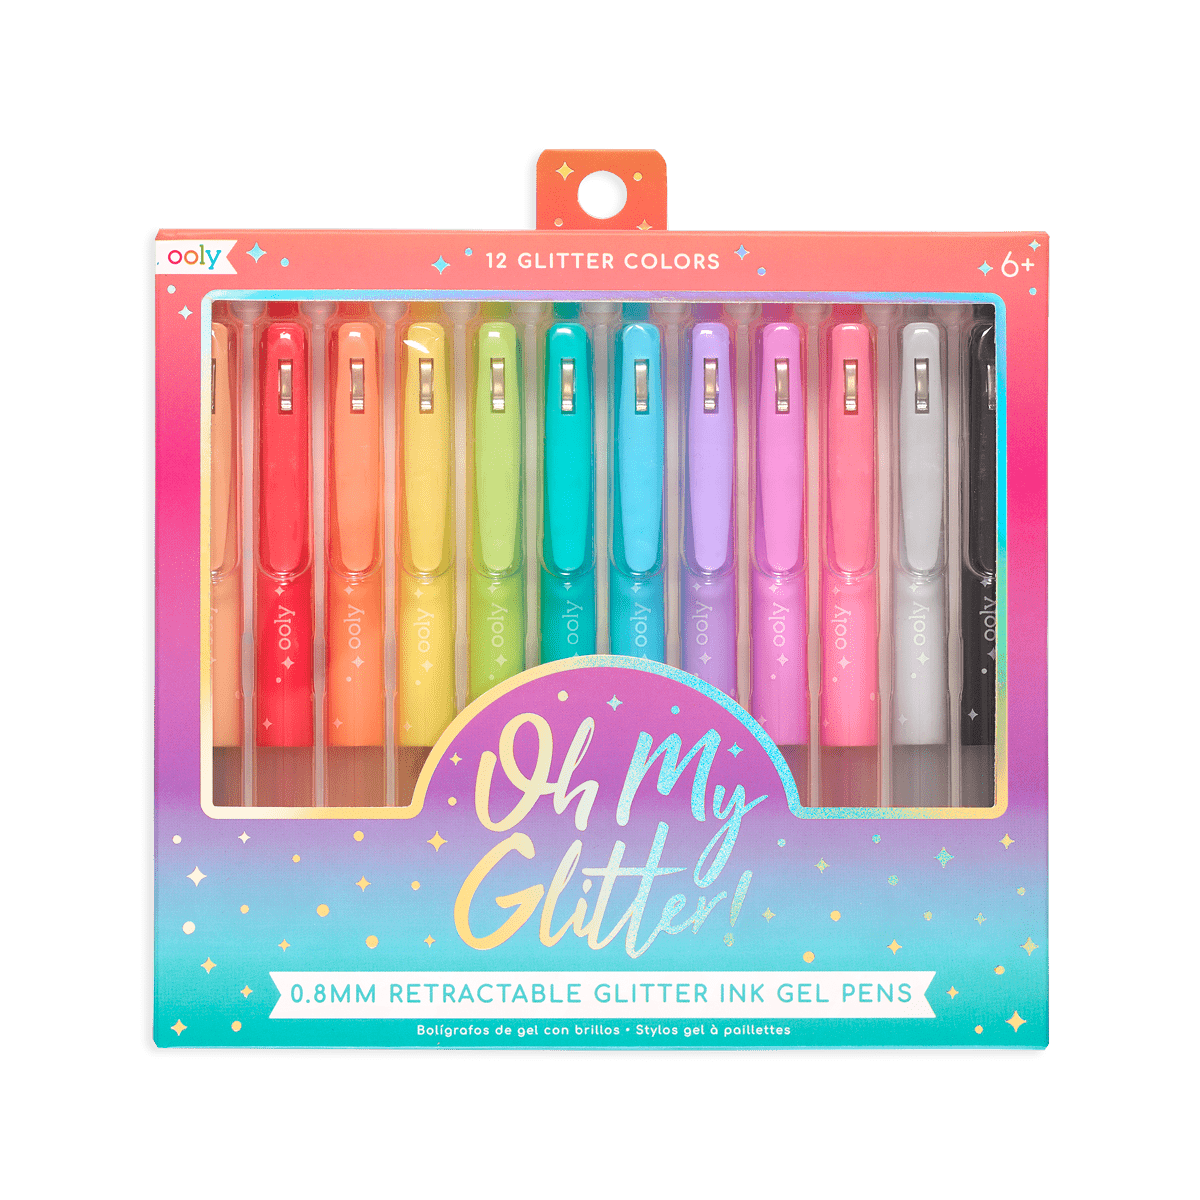 https://cdn.shopify.com/s/files/1/1225/1748/products/810078035756-ooly-oh-my-glitter-retractable-gel-pens-set-of-12-by-ooly-29018901577803_1600x.png?v=1696356028